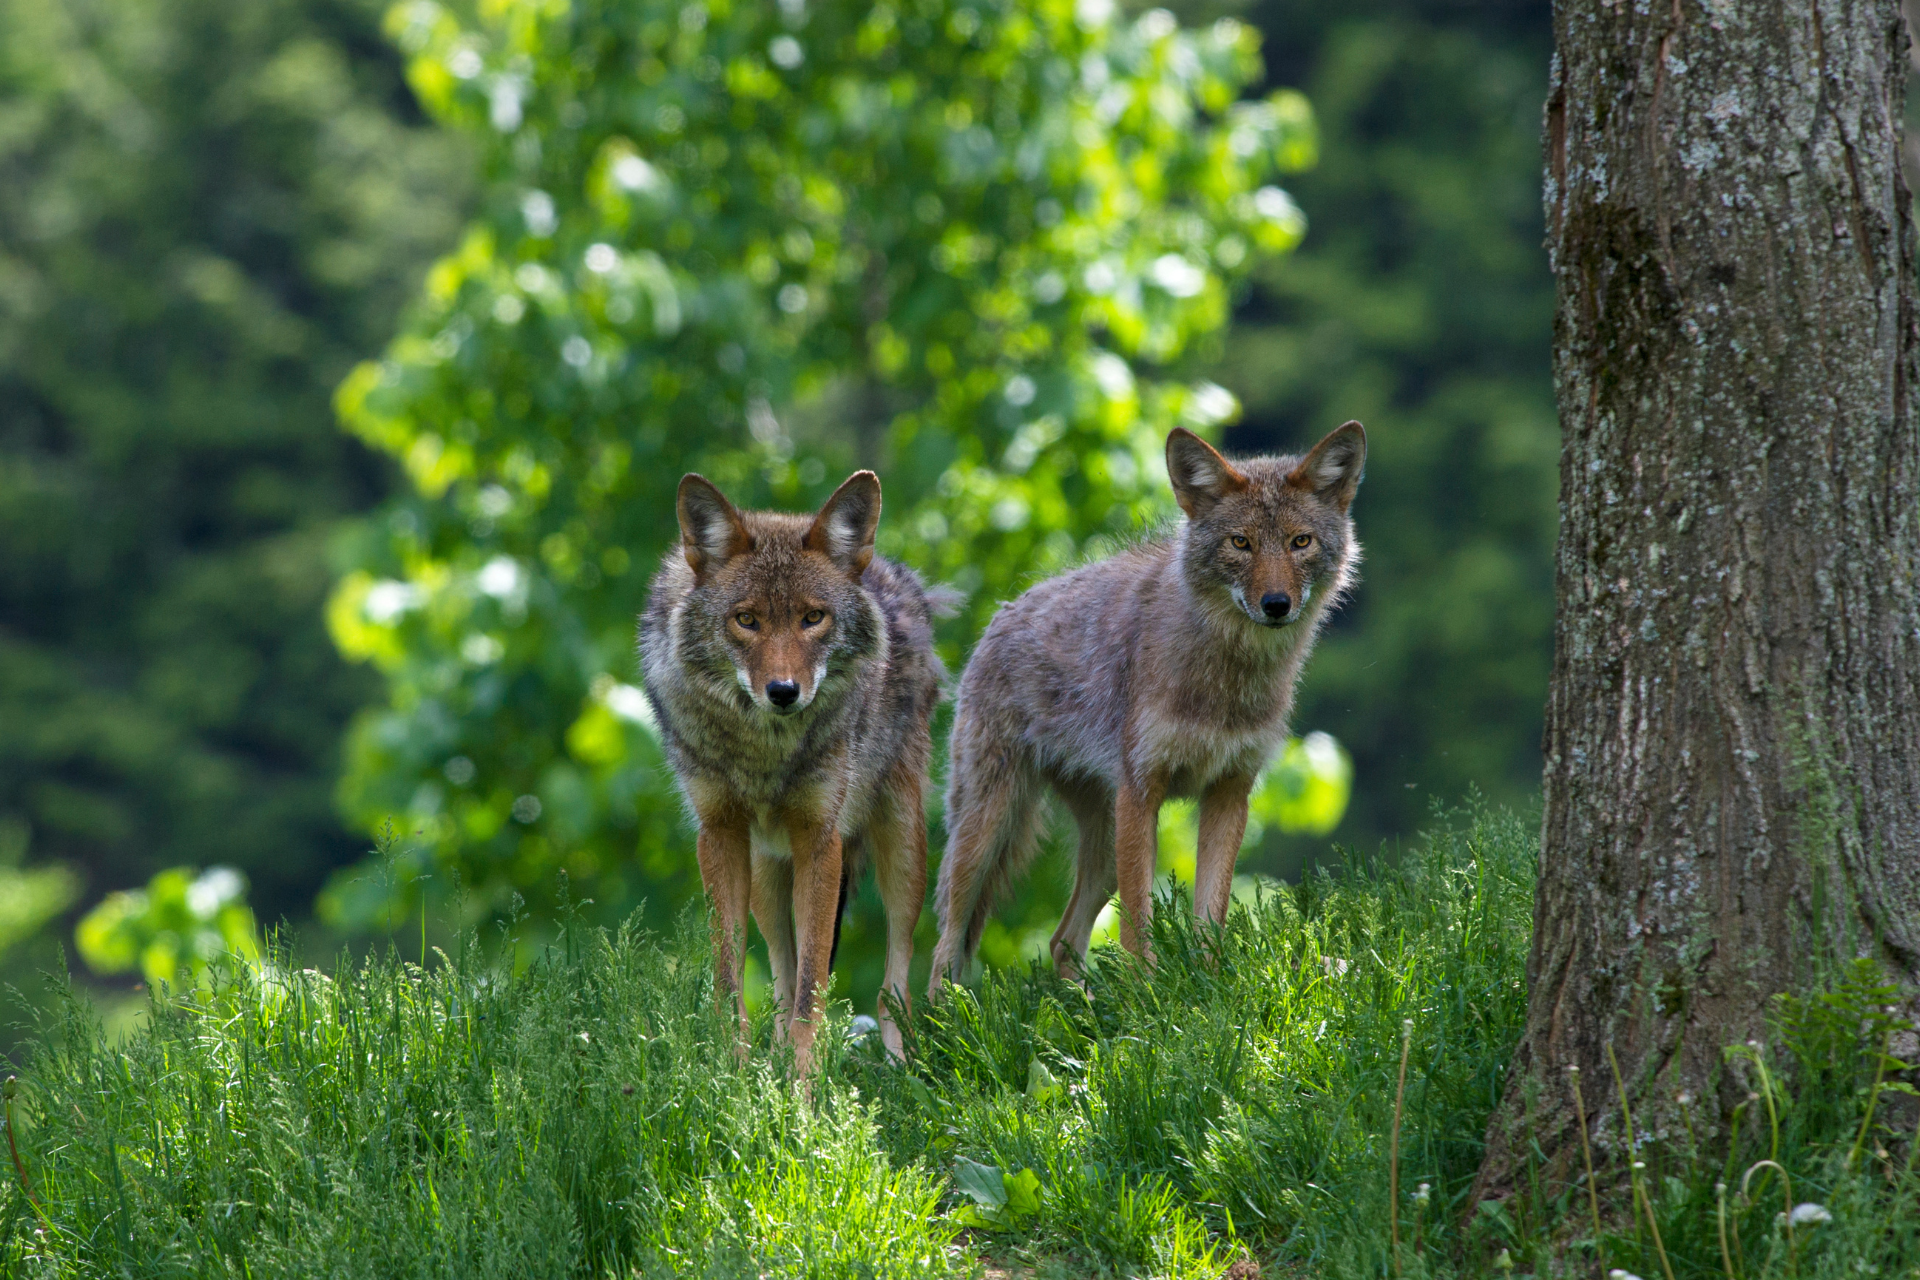 two coyotes are standing next to each other in a grassy field .